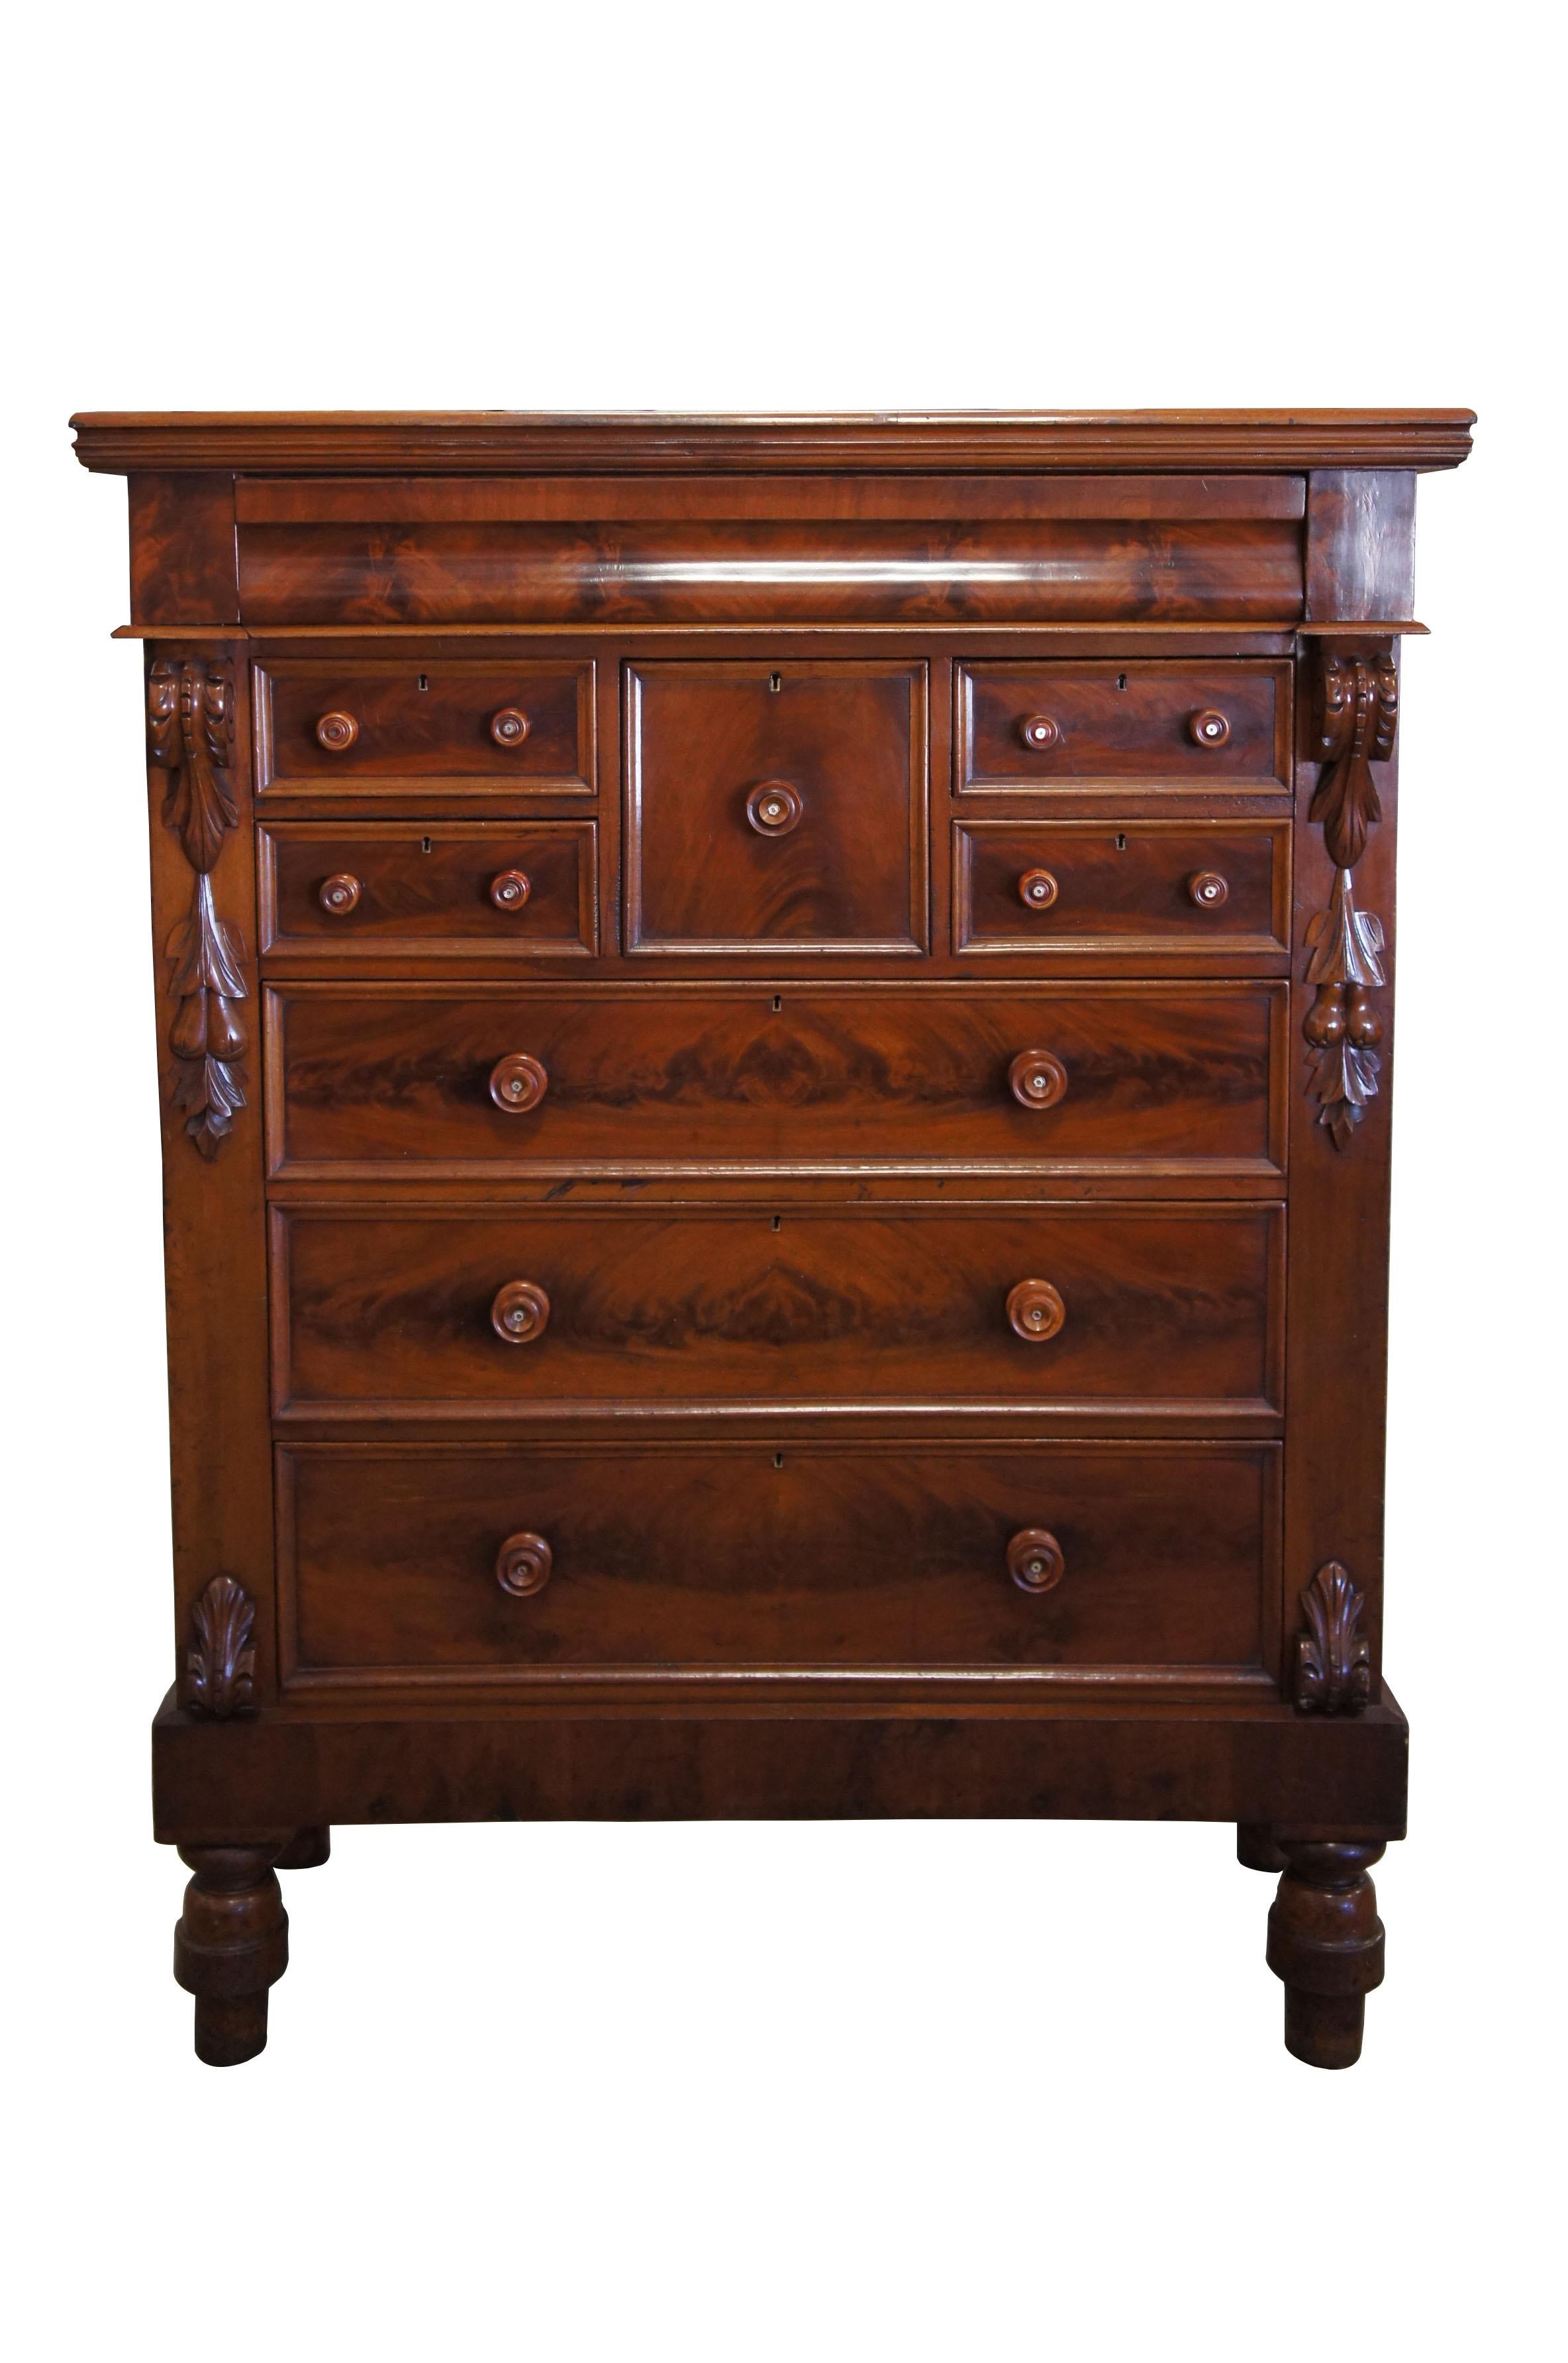 Scottish flamed mahogany antique 1850s Empire highboy dresser chest of drawers

An exceptional example of Scottish craftsmanship. This monumental Empire chest of drawers draws you in again and again. Made from crotch mahogany with extraordinary